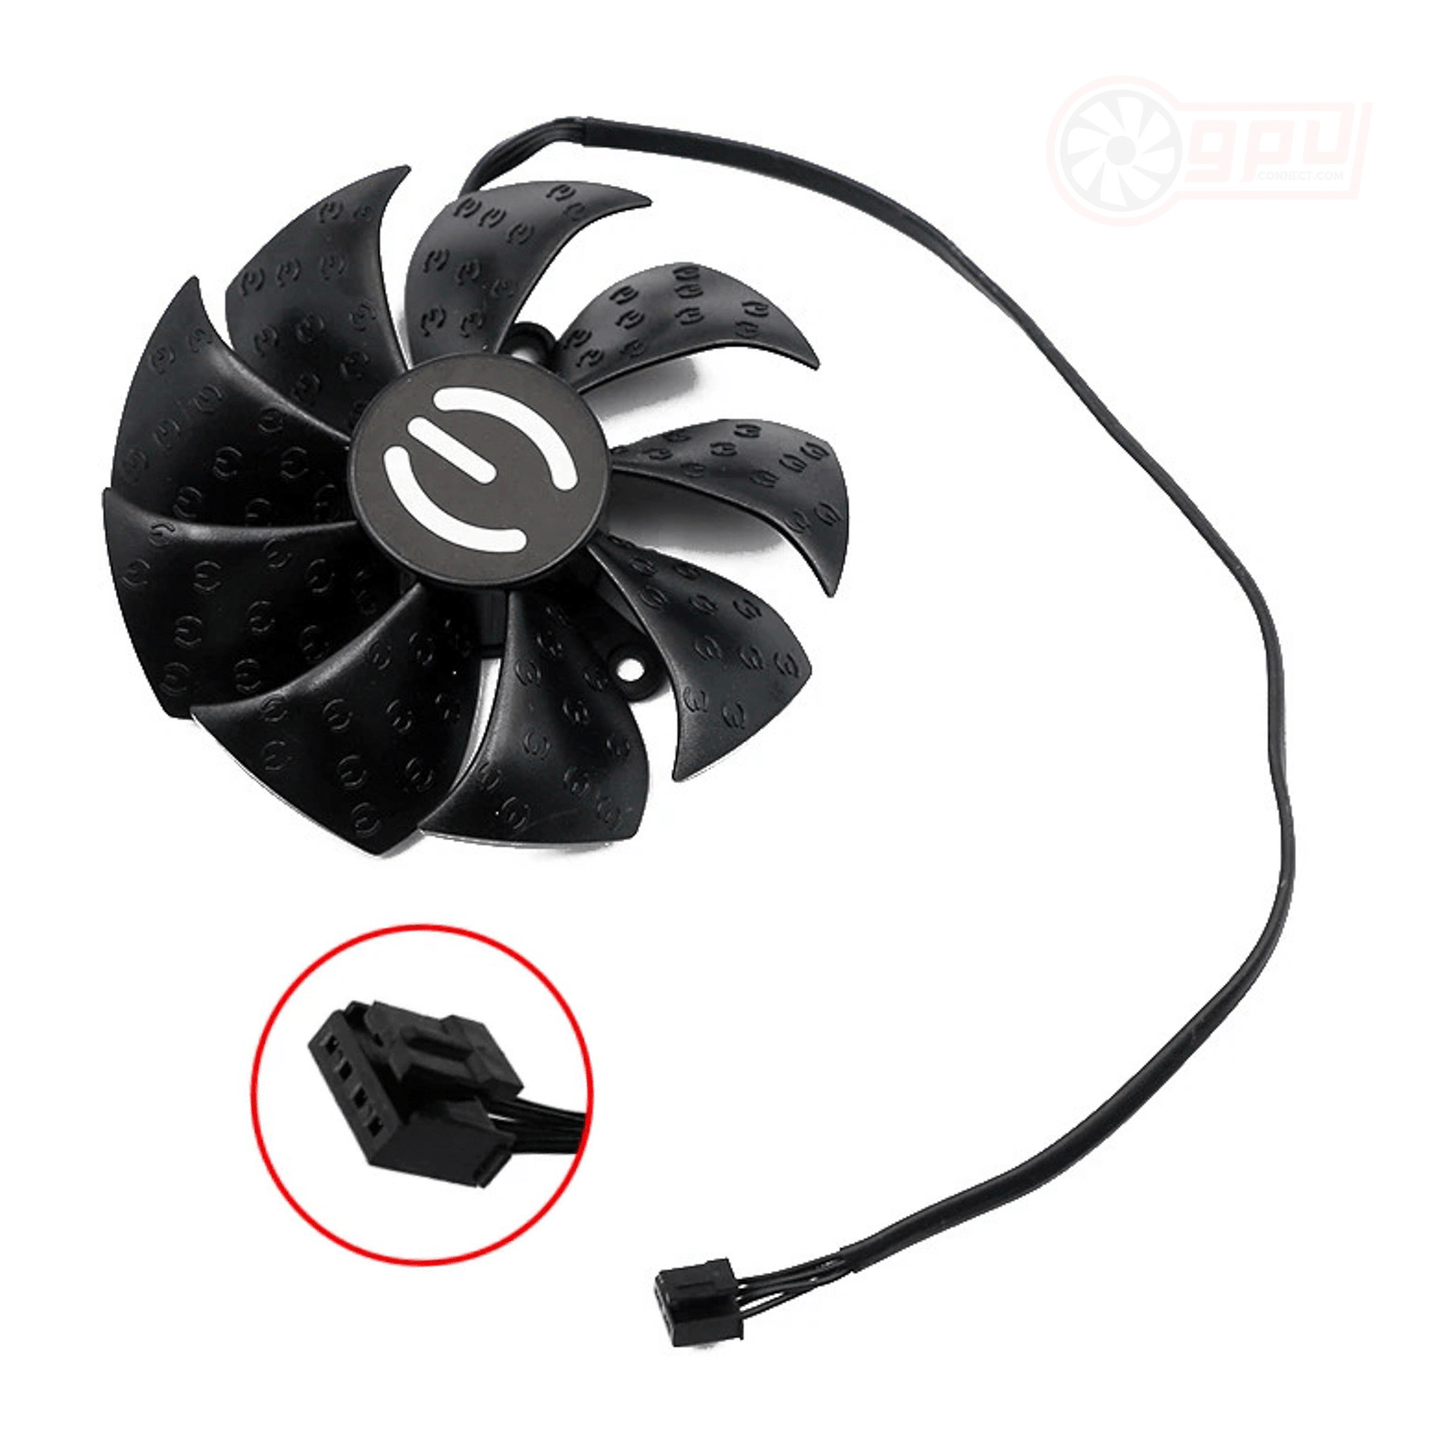 EVGA RTX 3060 3070 3080 Ti 3090 FTW3 ULTRA Replacement Fans (20mm) - GPUCONNECT.COM